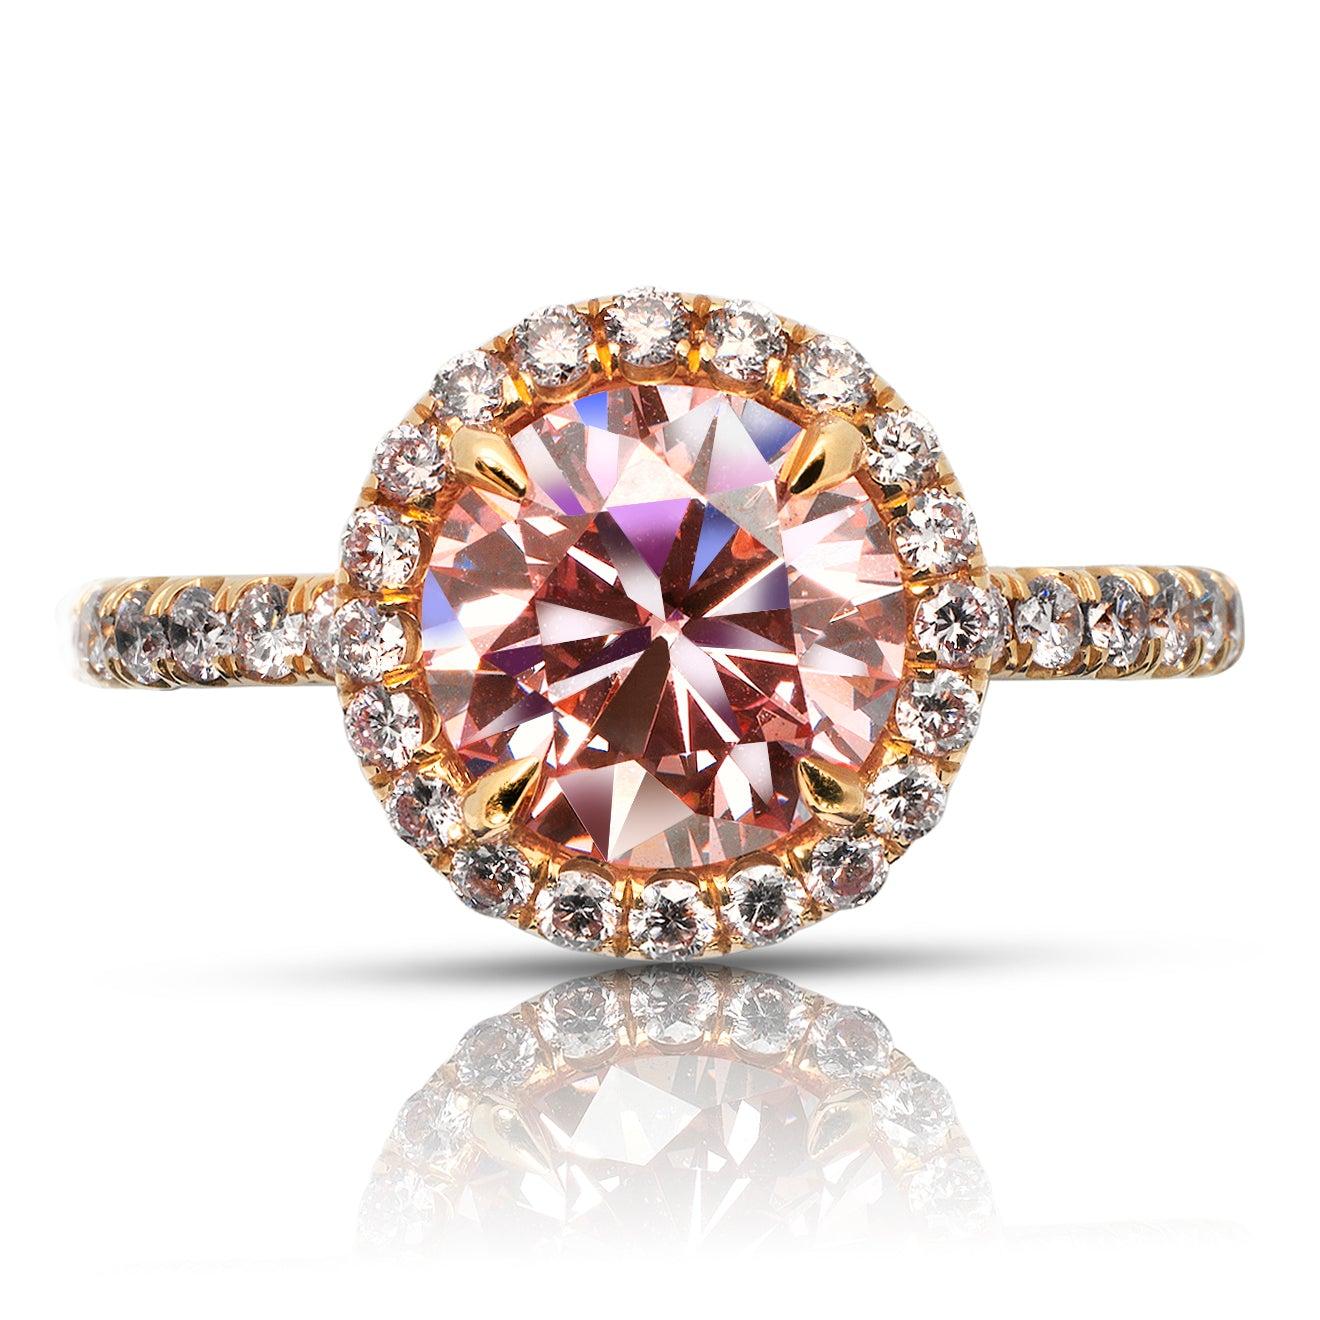 LUNE  -FANCY INTENSE ORANGY PINK HALO PINK DIAMOND ENGAGEMENT RING 18K ROSE GOLD BY MIKE NEKTA

GIA CERTIFIED
Center Diamond
Carat Weight: 1.5 Carats
Color : FANCY INTENSE ORANGY PINK*
Clarity: VVS1
Style: ROUND BRILLIANT 
Approximate Measurements: